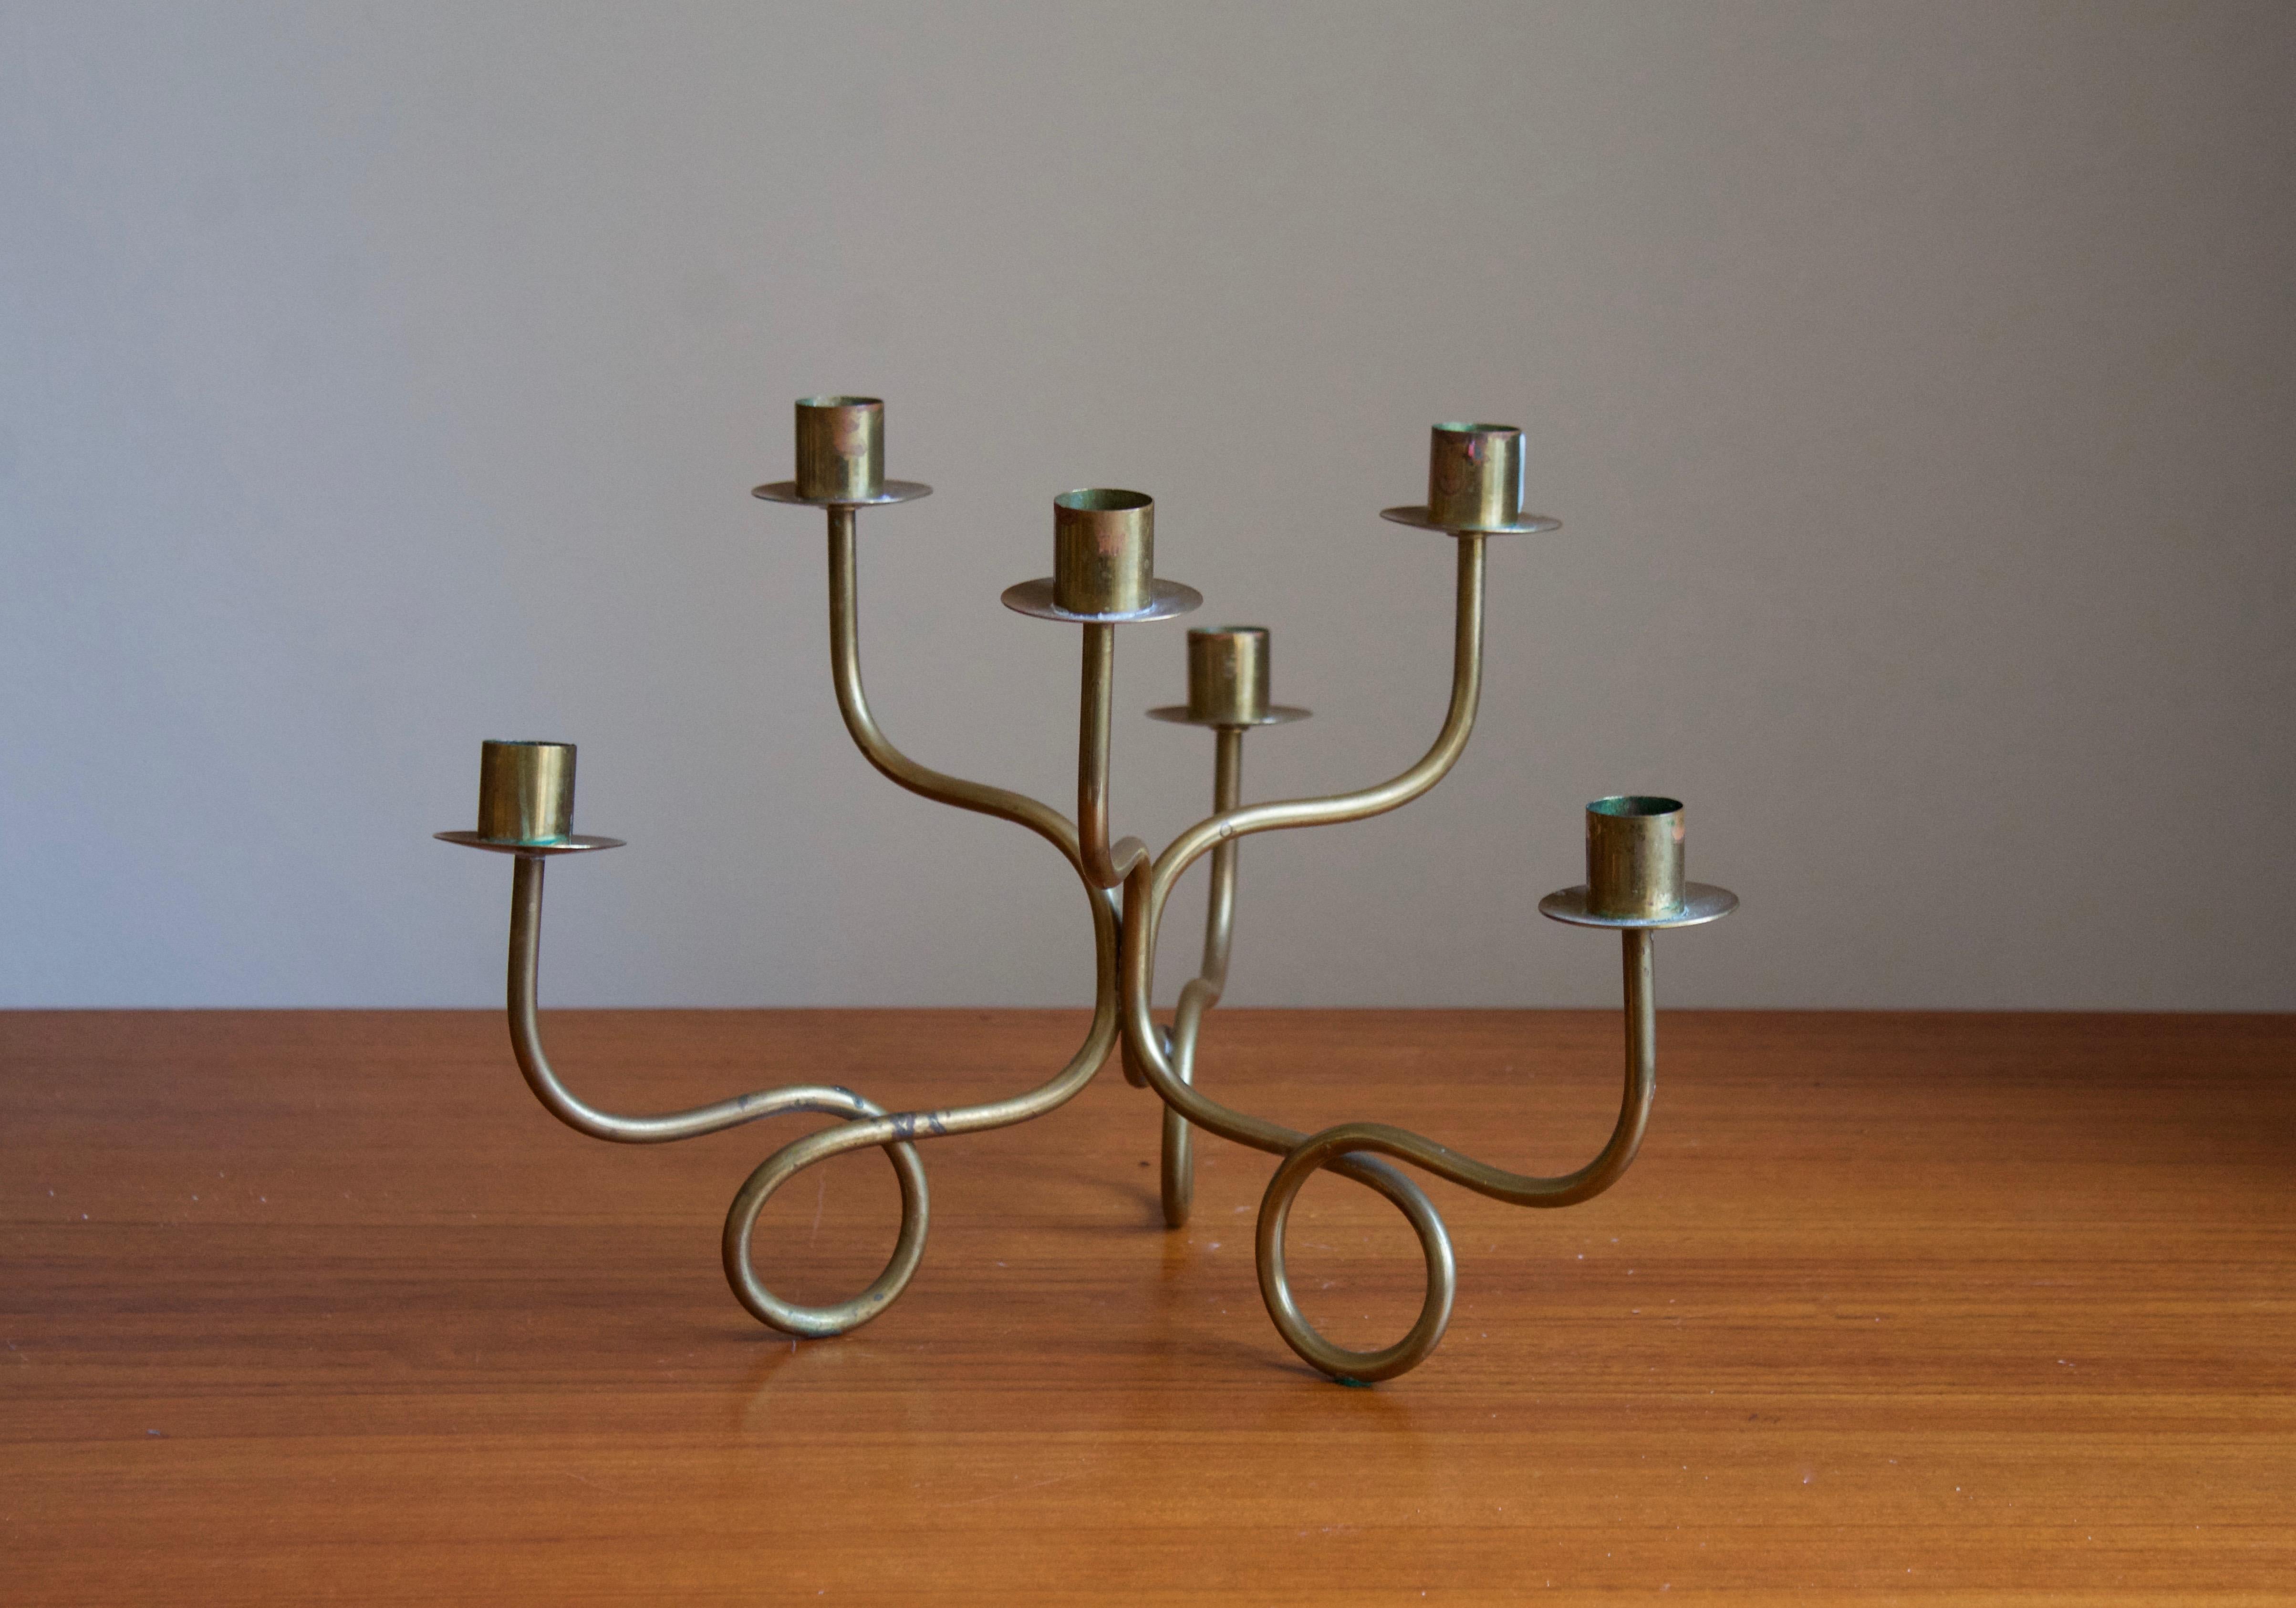 An organic modernist candelabra that holds 6 candles. Designed by Josef Frank for Svenskt Tenn. Produced in 1950s.

Other designers of the period include Paavo Tynell, Kaare Klint, Hans Agne Jacobsen, and Alvar Aalto.